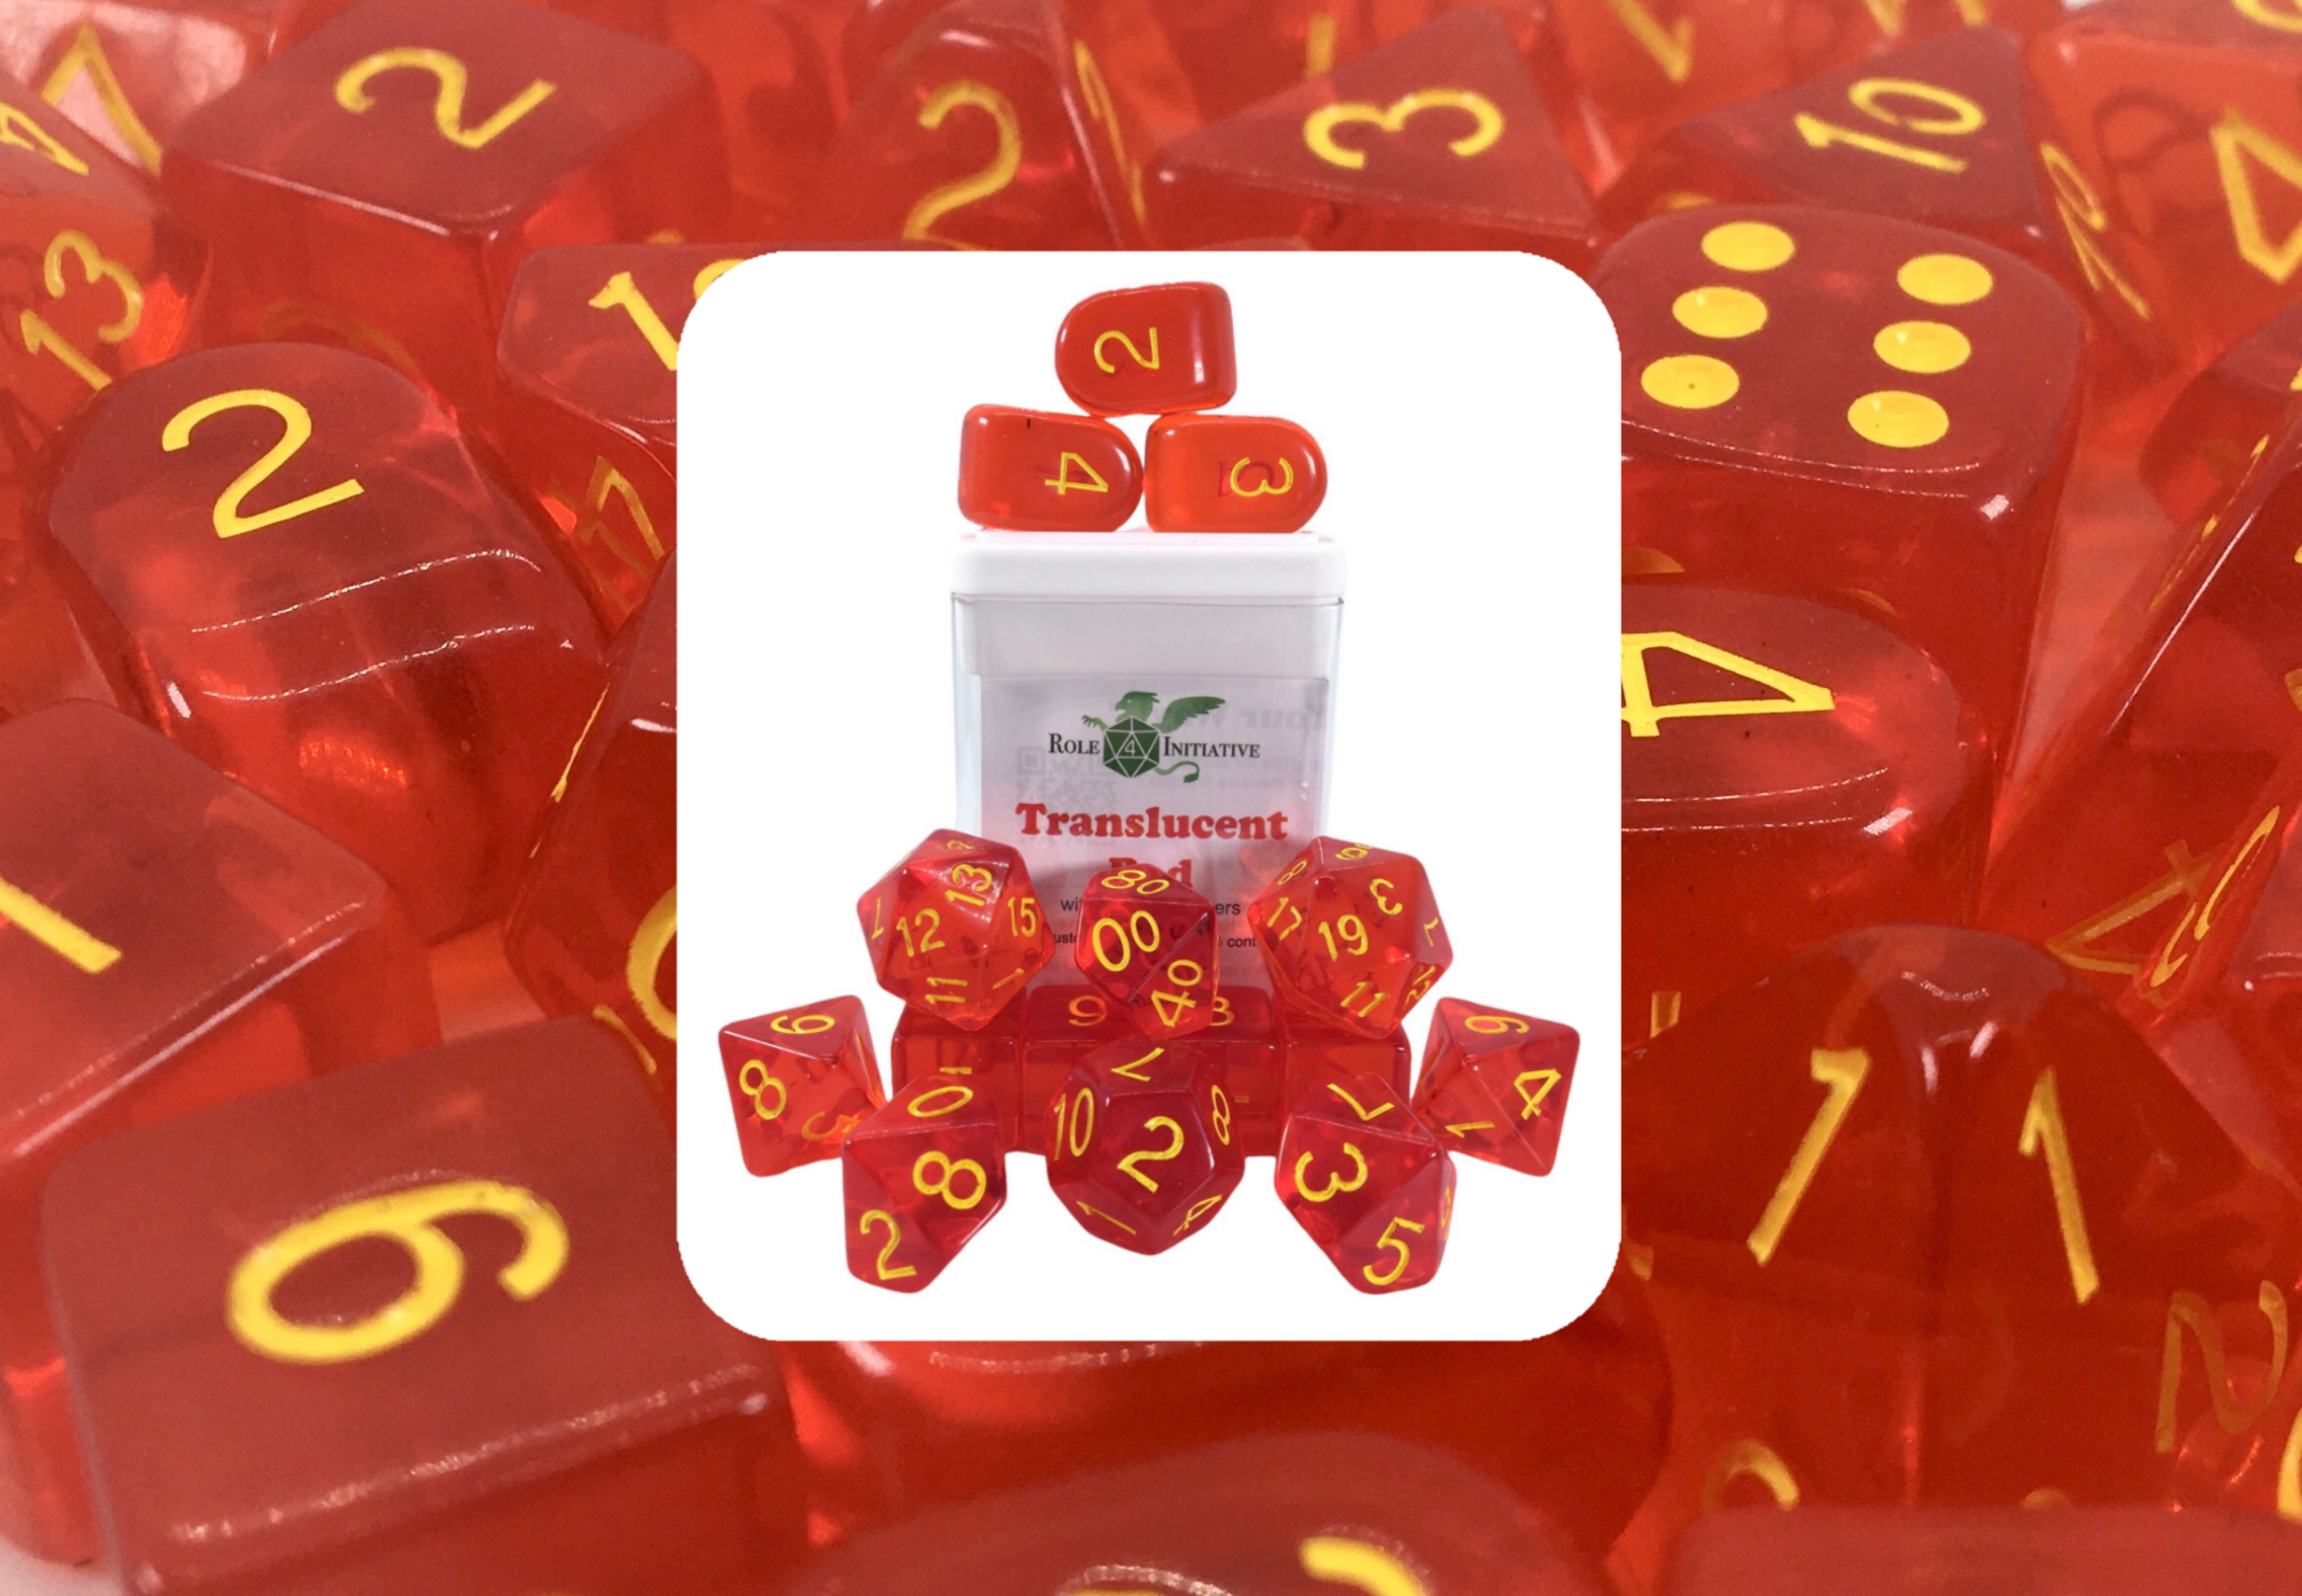 Role 4 Initiative: Polyhedral 15 Dice Set: Translucent Red with Yellow (Arch D4) 